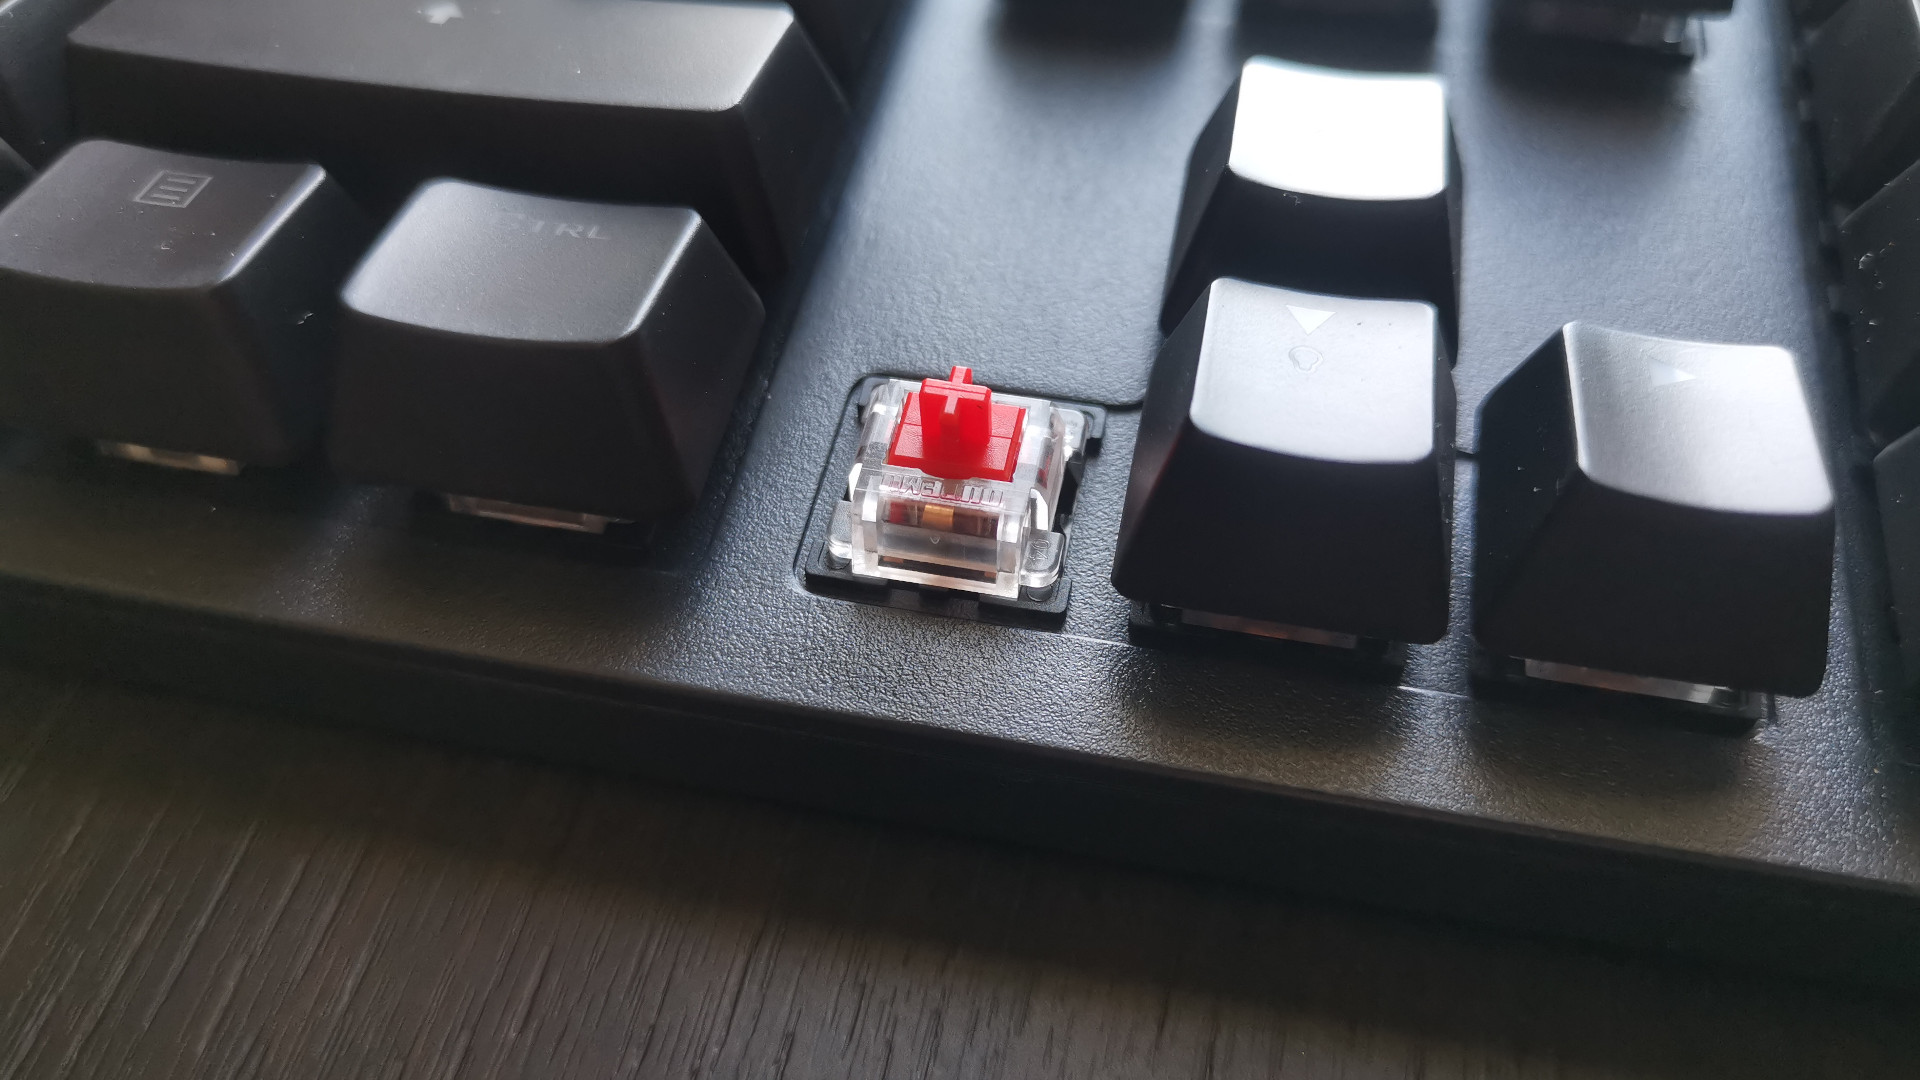 The red keys used on the Trust GXT 863 Mazz Gaming Keyboard